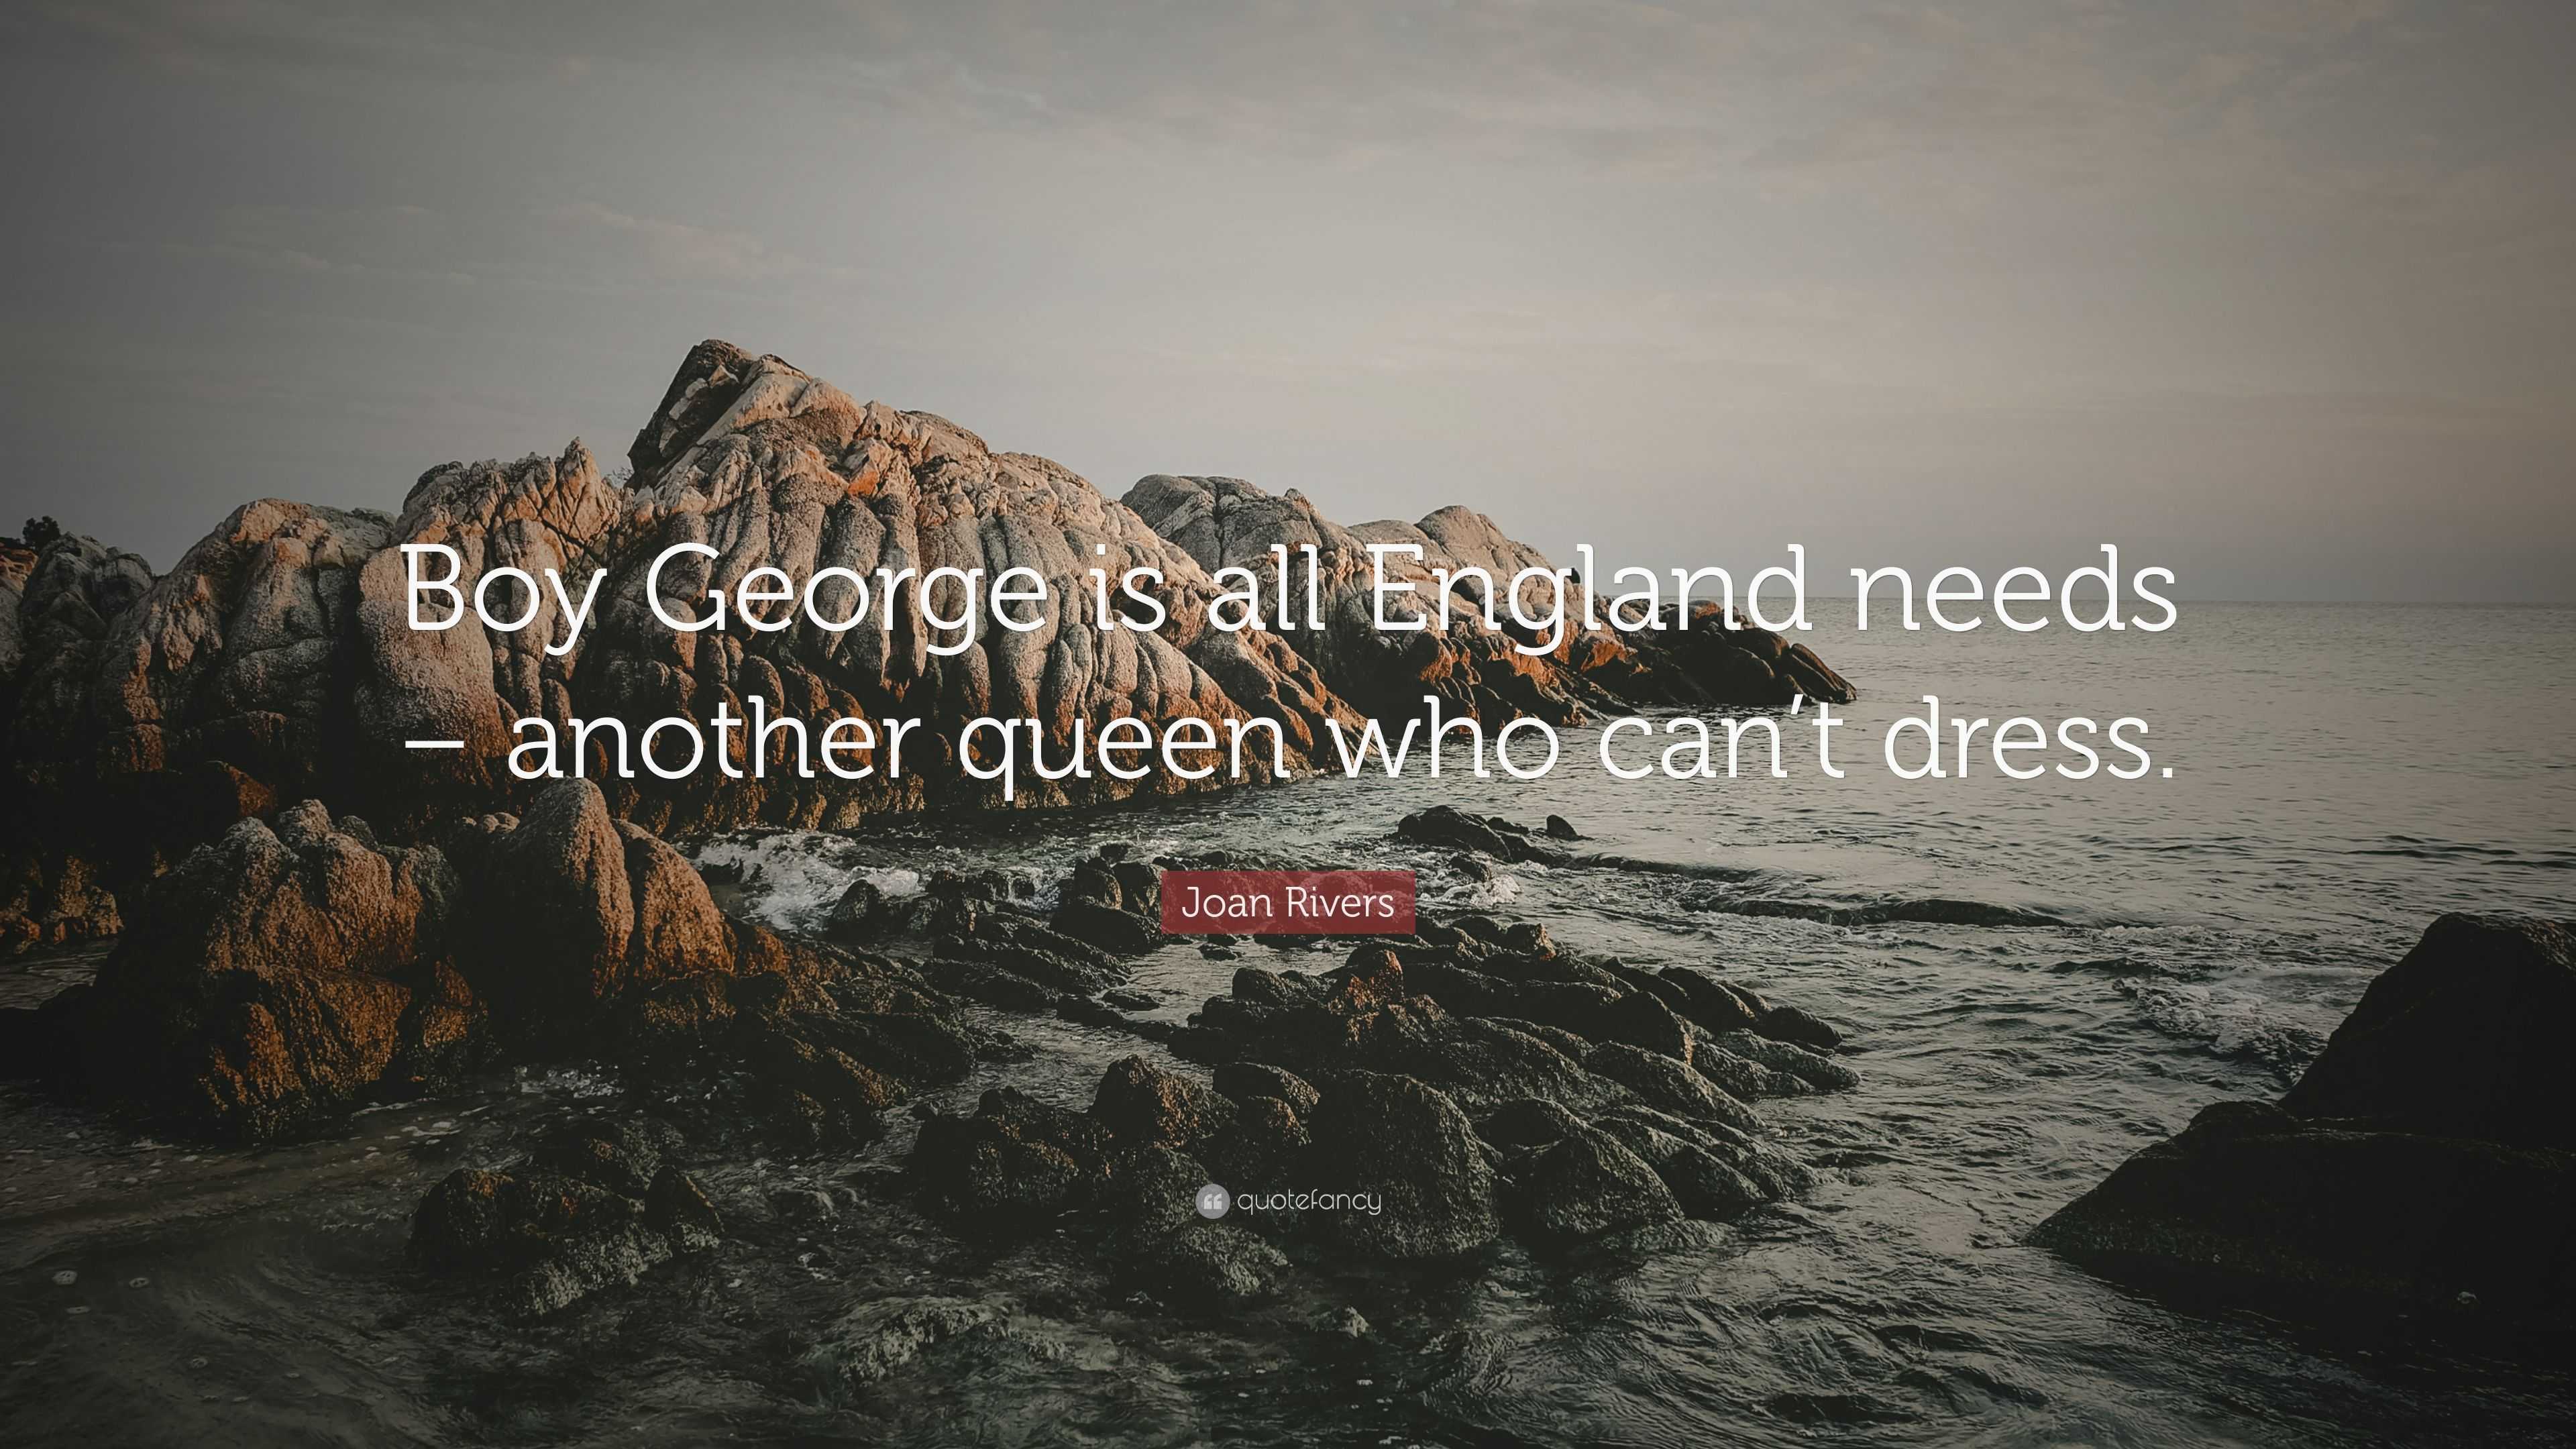 Quote: “Boy – George needs who is England all can\'t Rivers queen another Joan